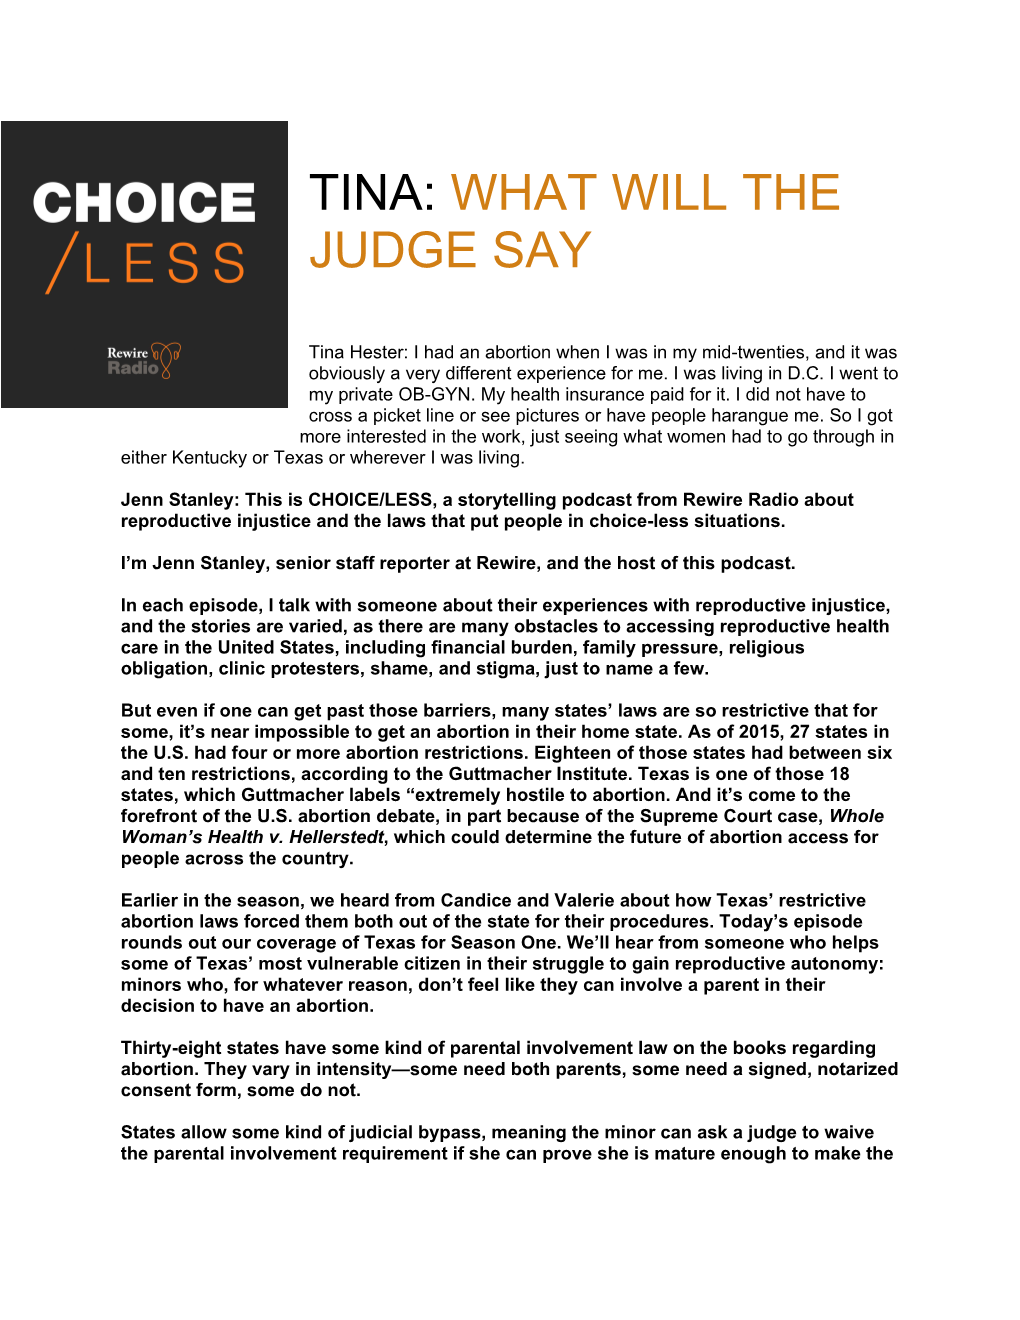 Tina: What Will the Judge Say